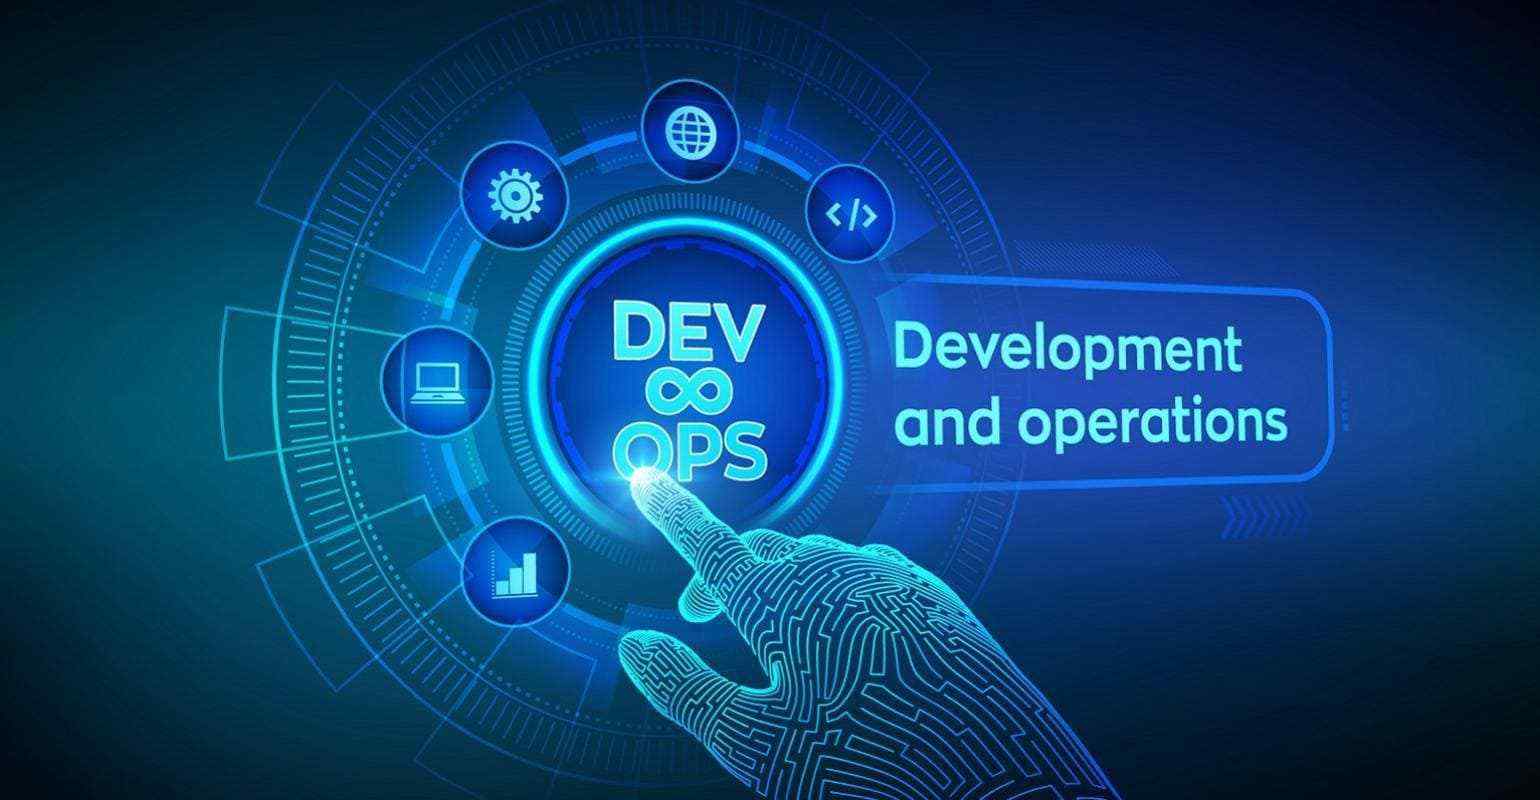 DevOps - Connecting Technology to People